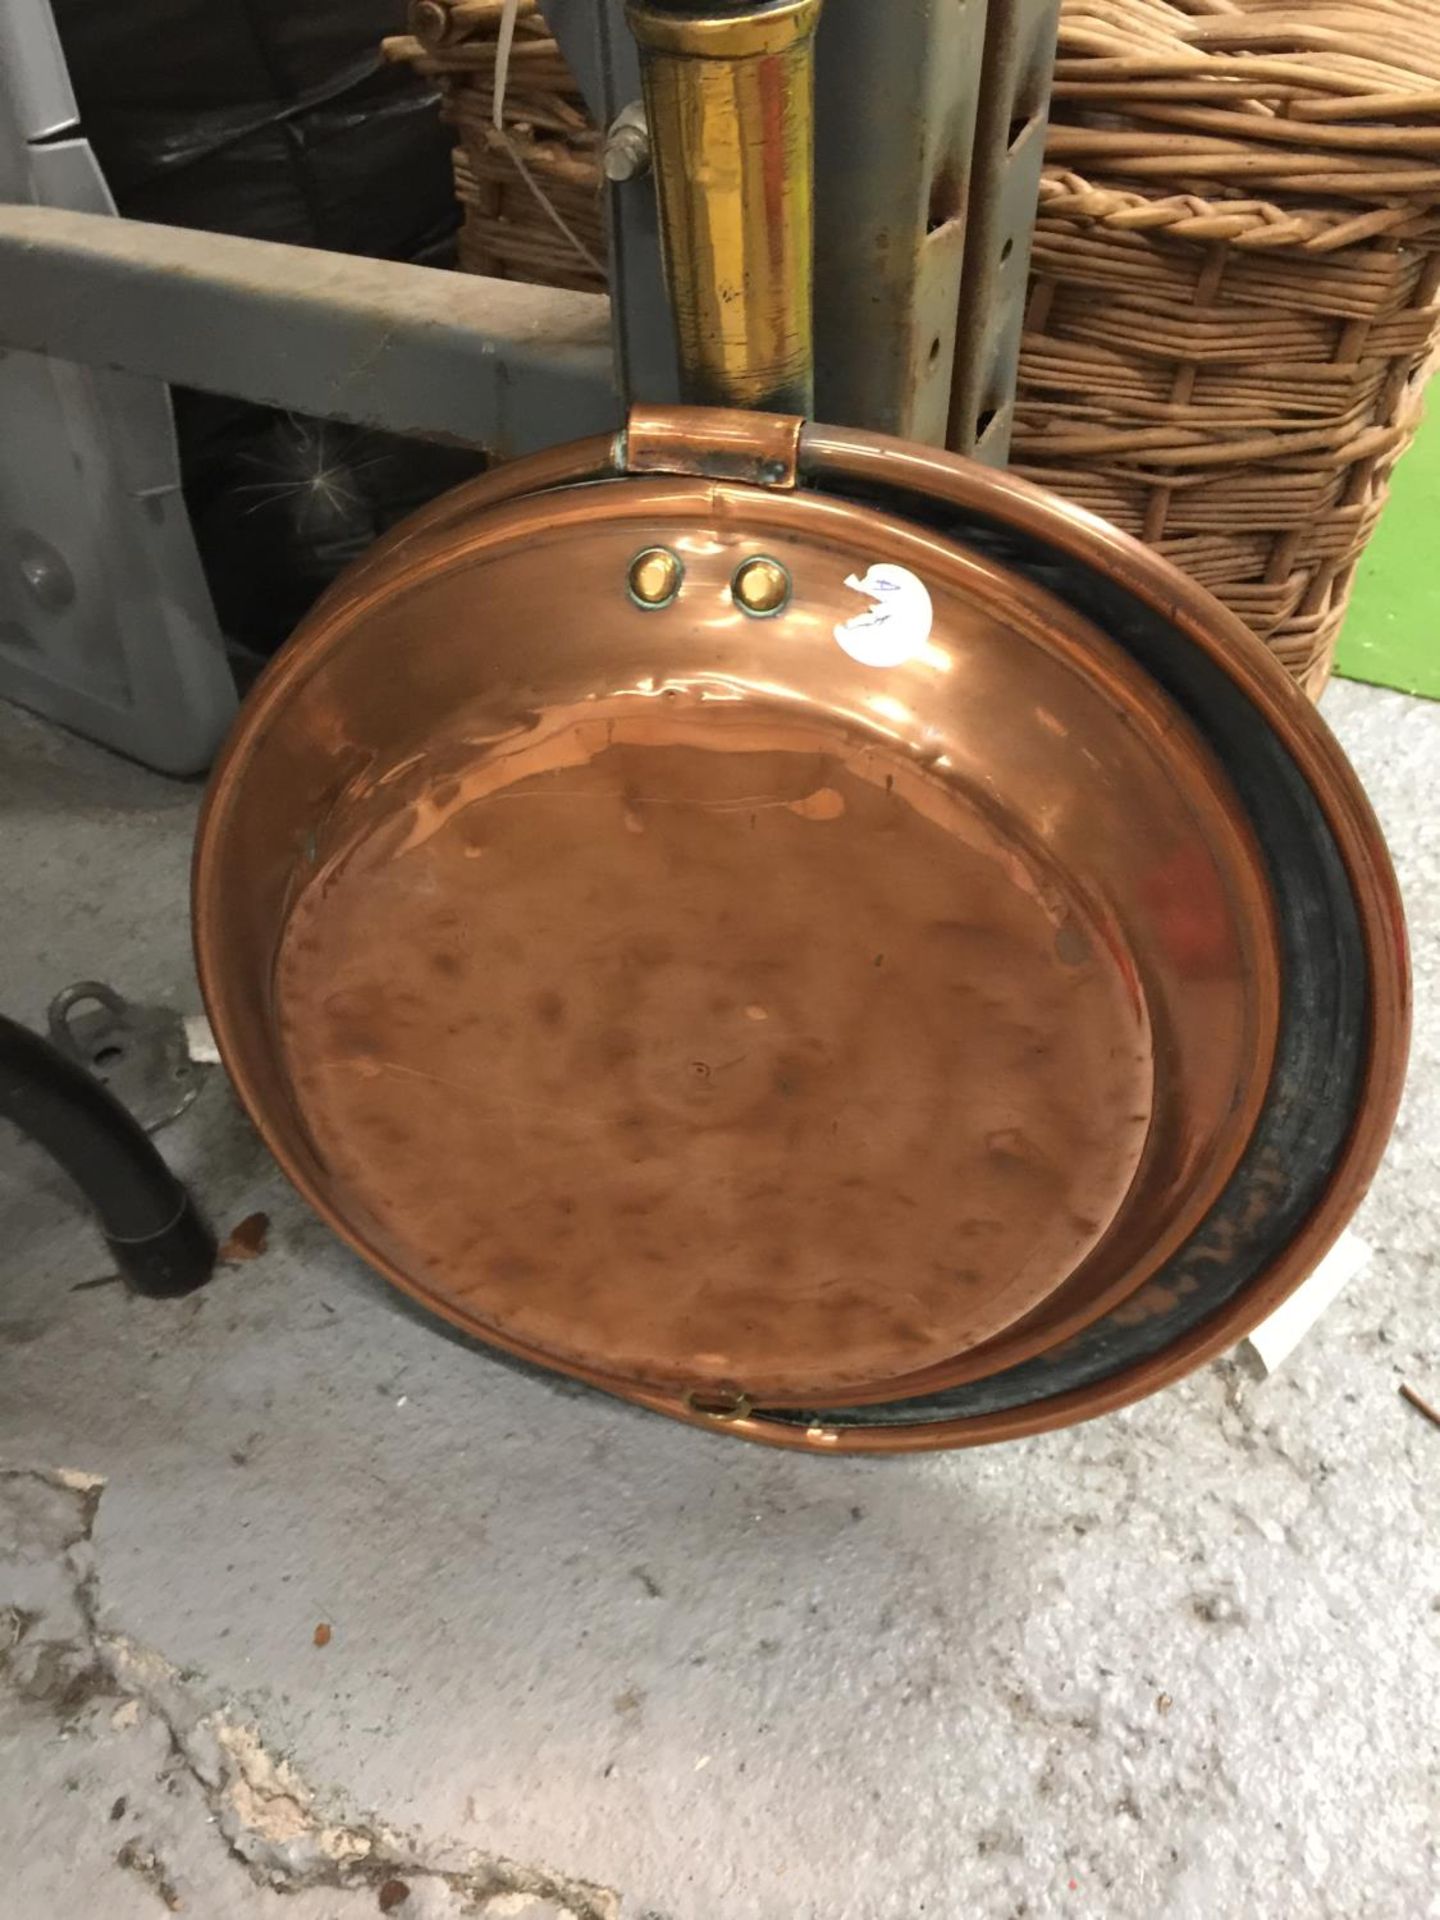 A COPPER BED WARMING PAN WITH A MAHOGANY HANDLE - Image 2 of 2